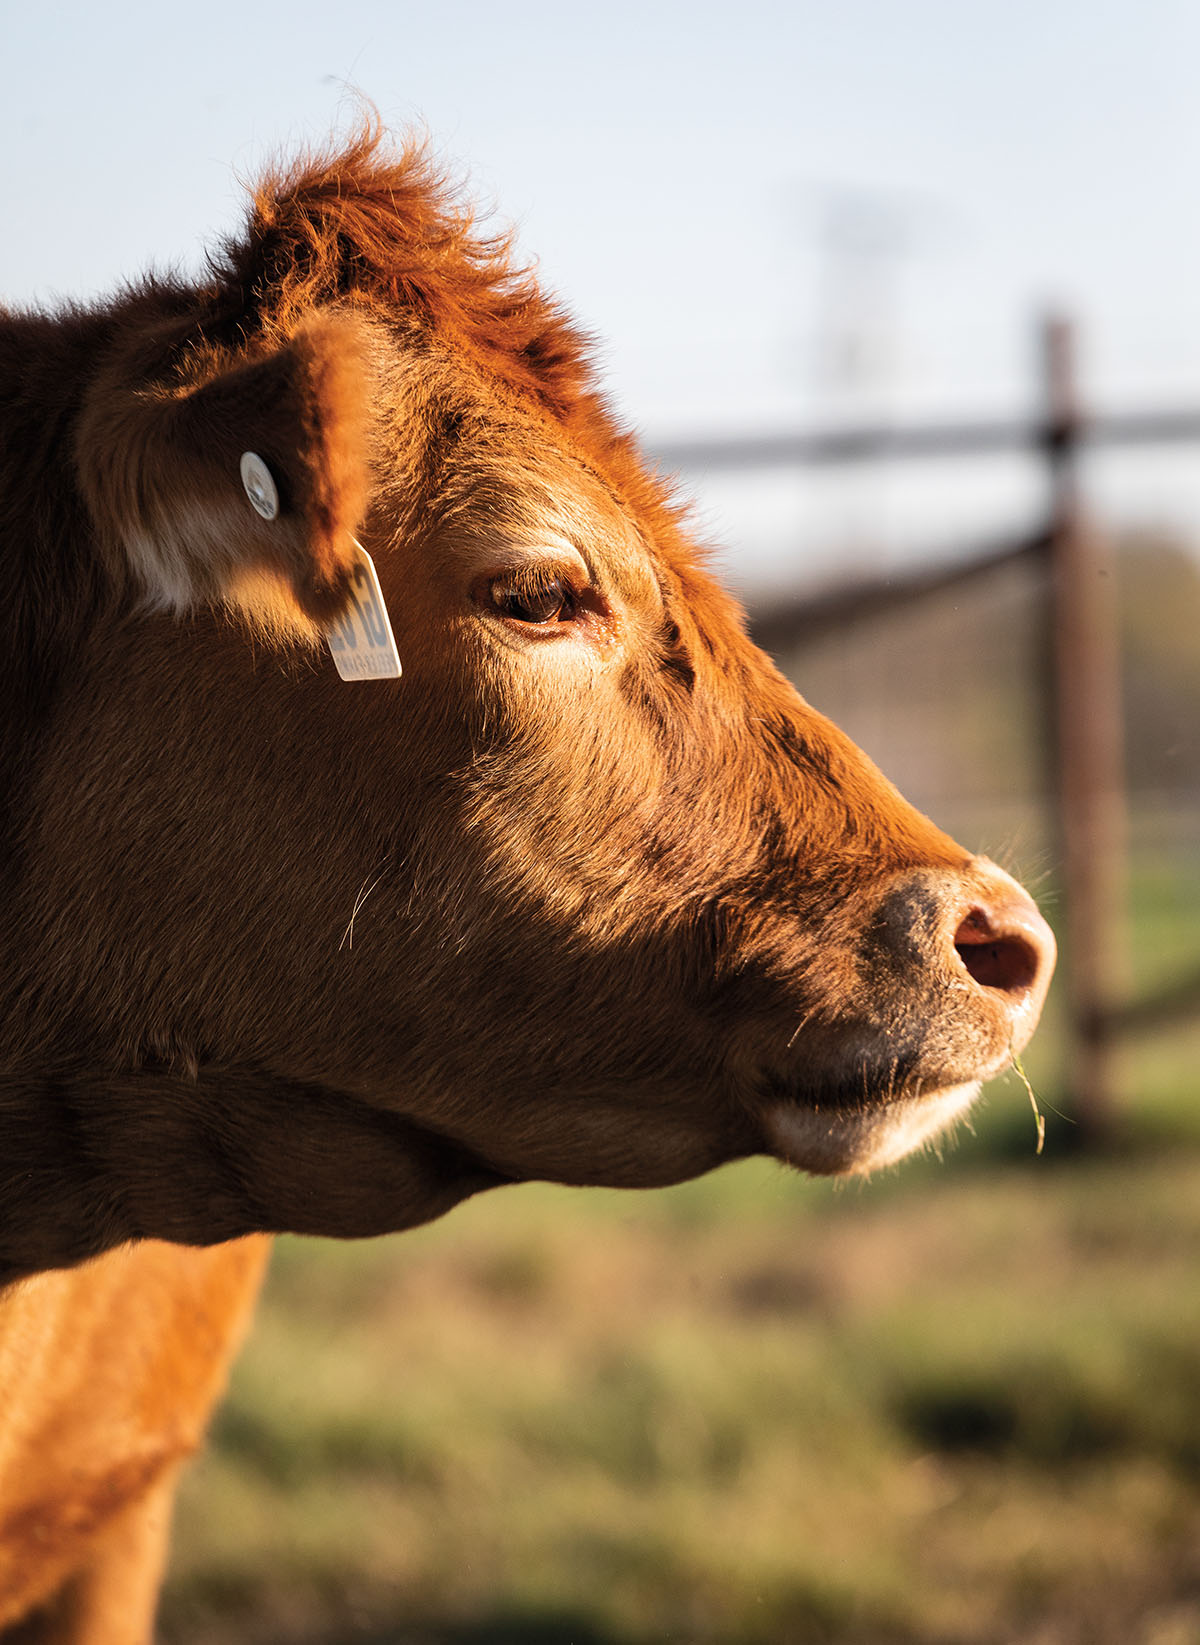 A close-up profile of a brown cow